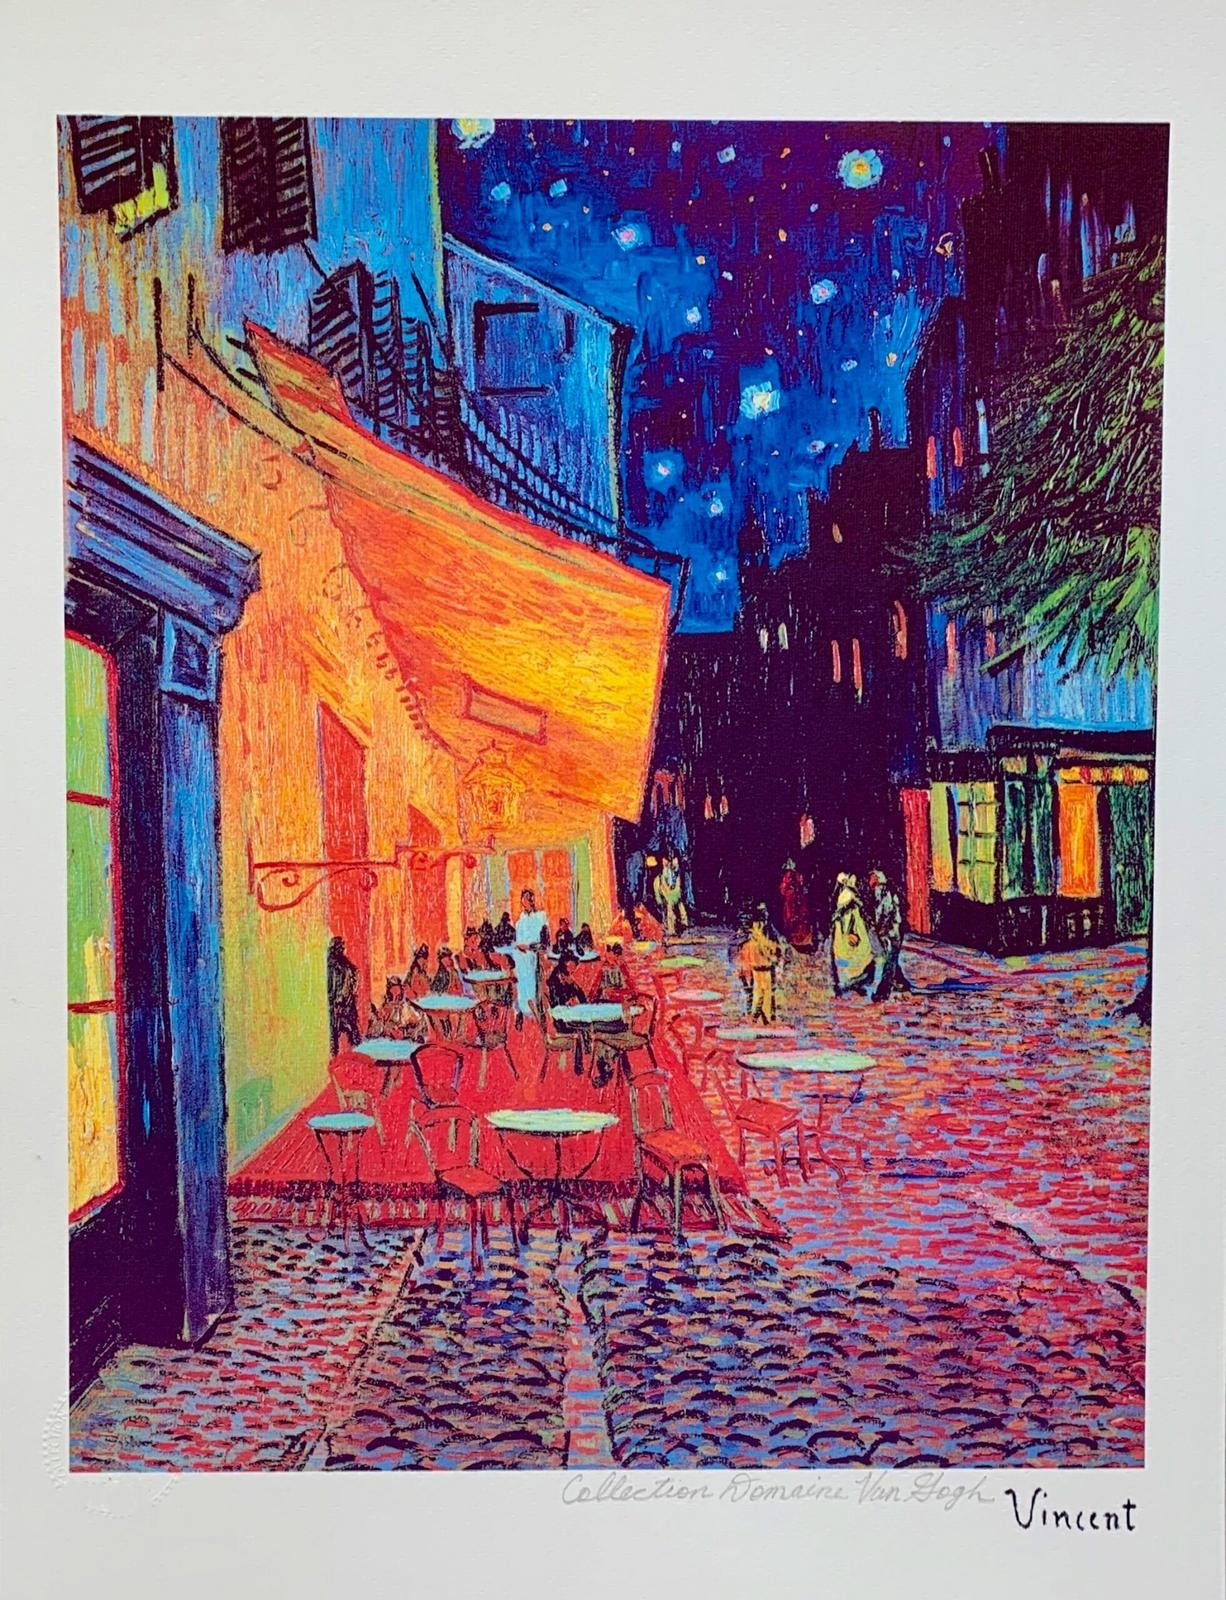 The Terrace Cafe by Vincent van Gogh